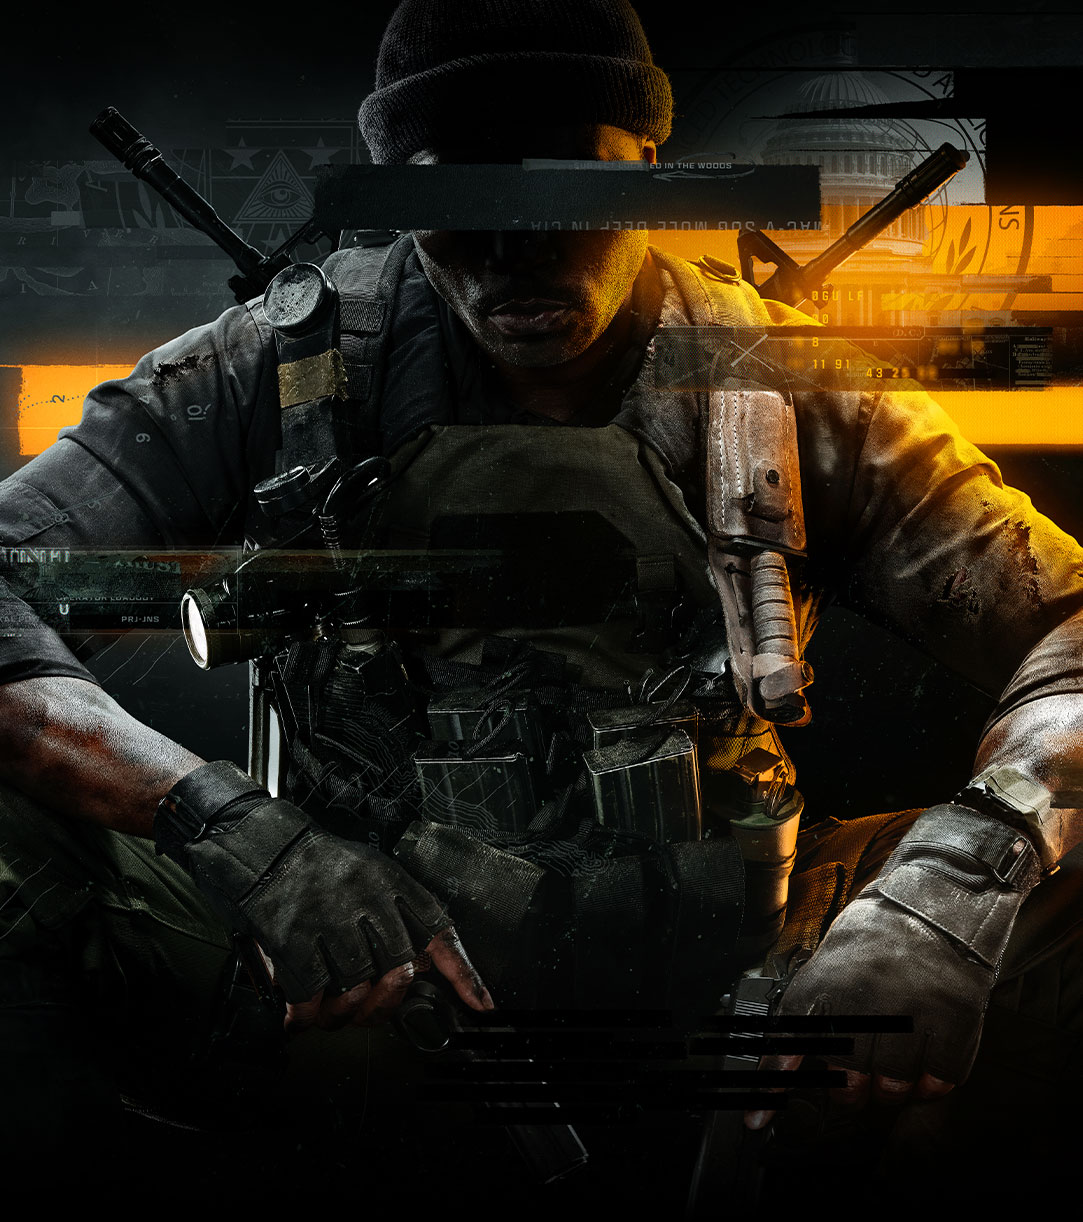 black ops soldier crouching down with two pistols in their hands.